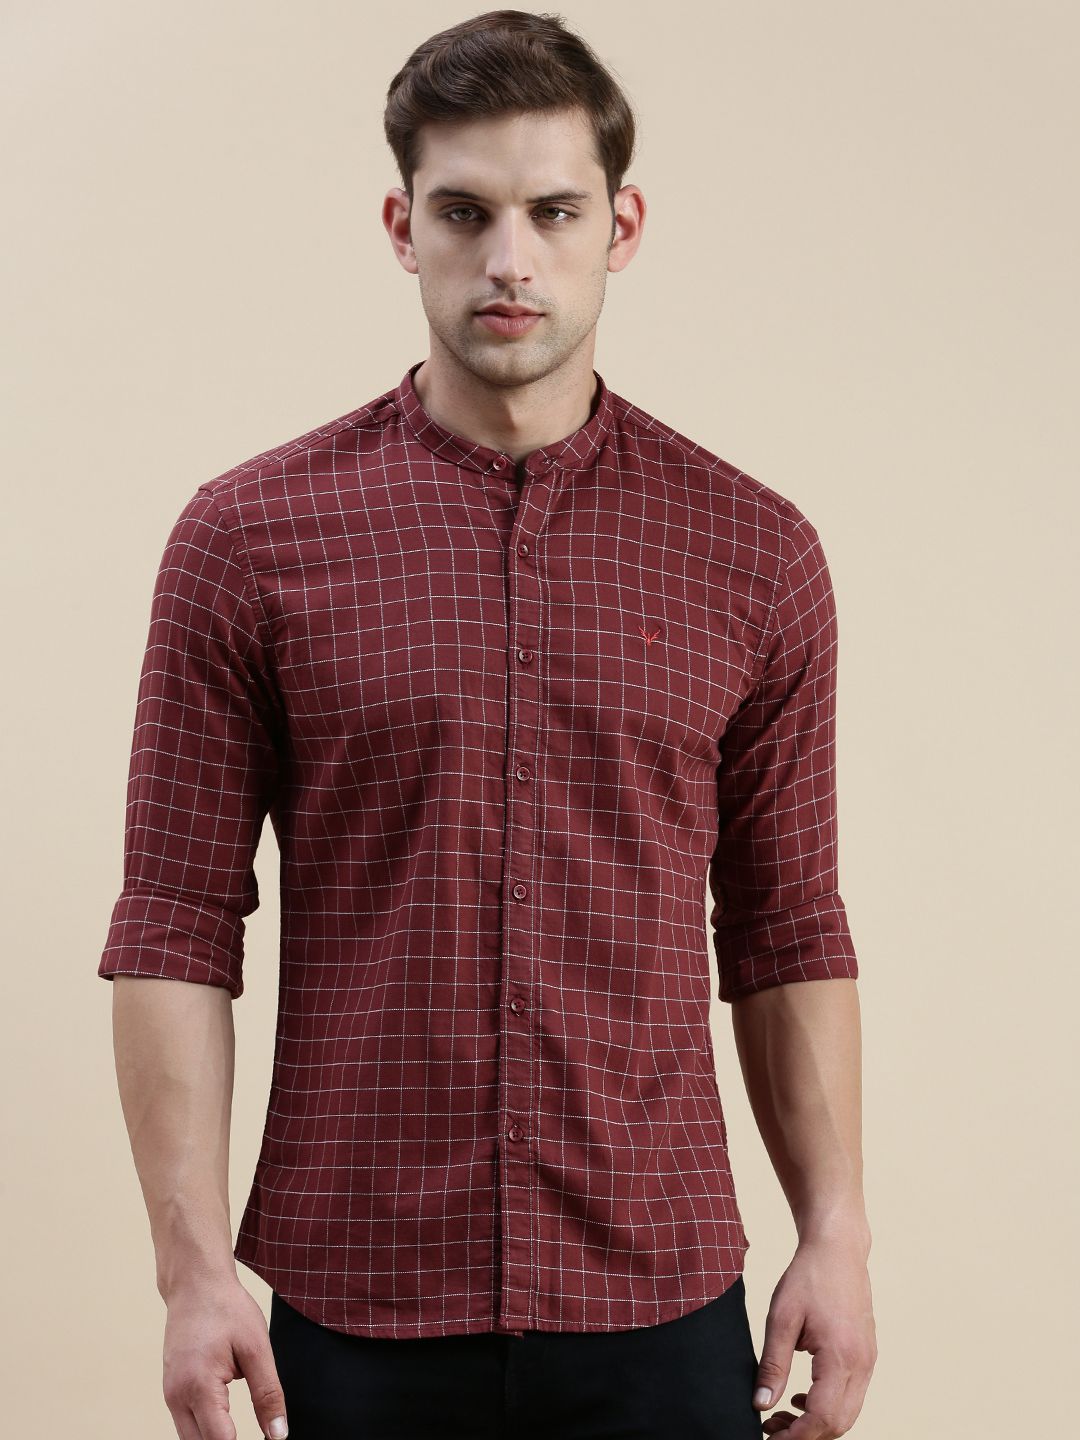     			Showoff Cotton Blend Regular Fit Checks Full Sleeves Men's Casual Shirt - Maroon ( Pack of 1 )